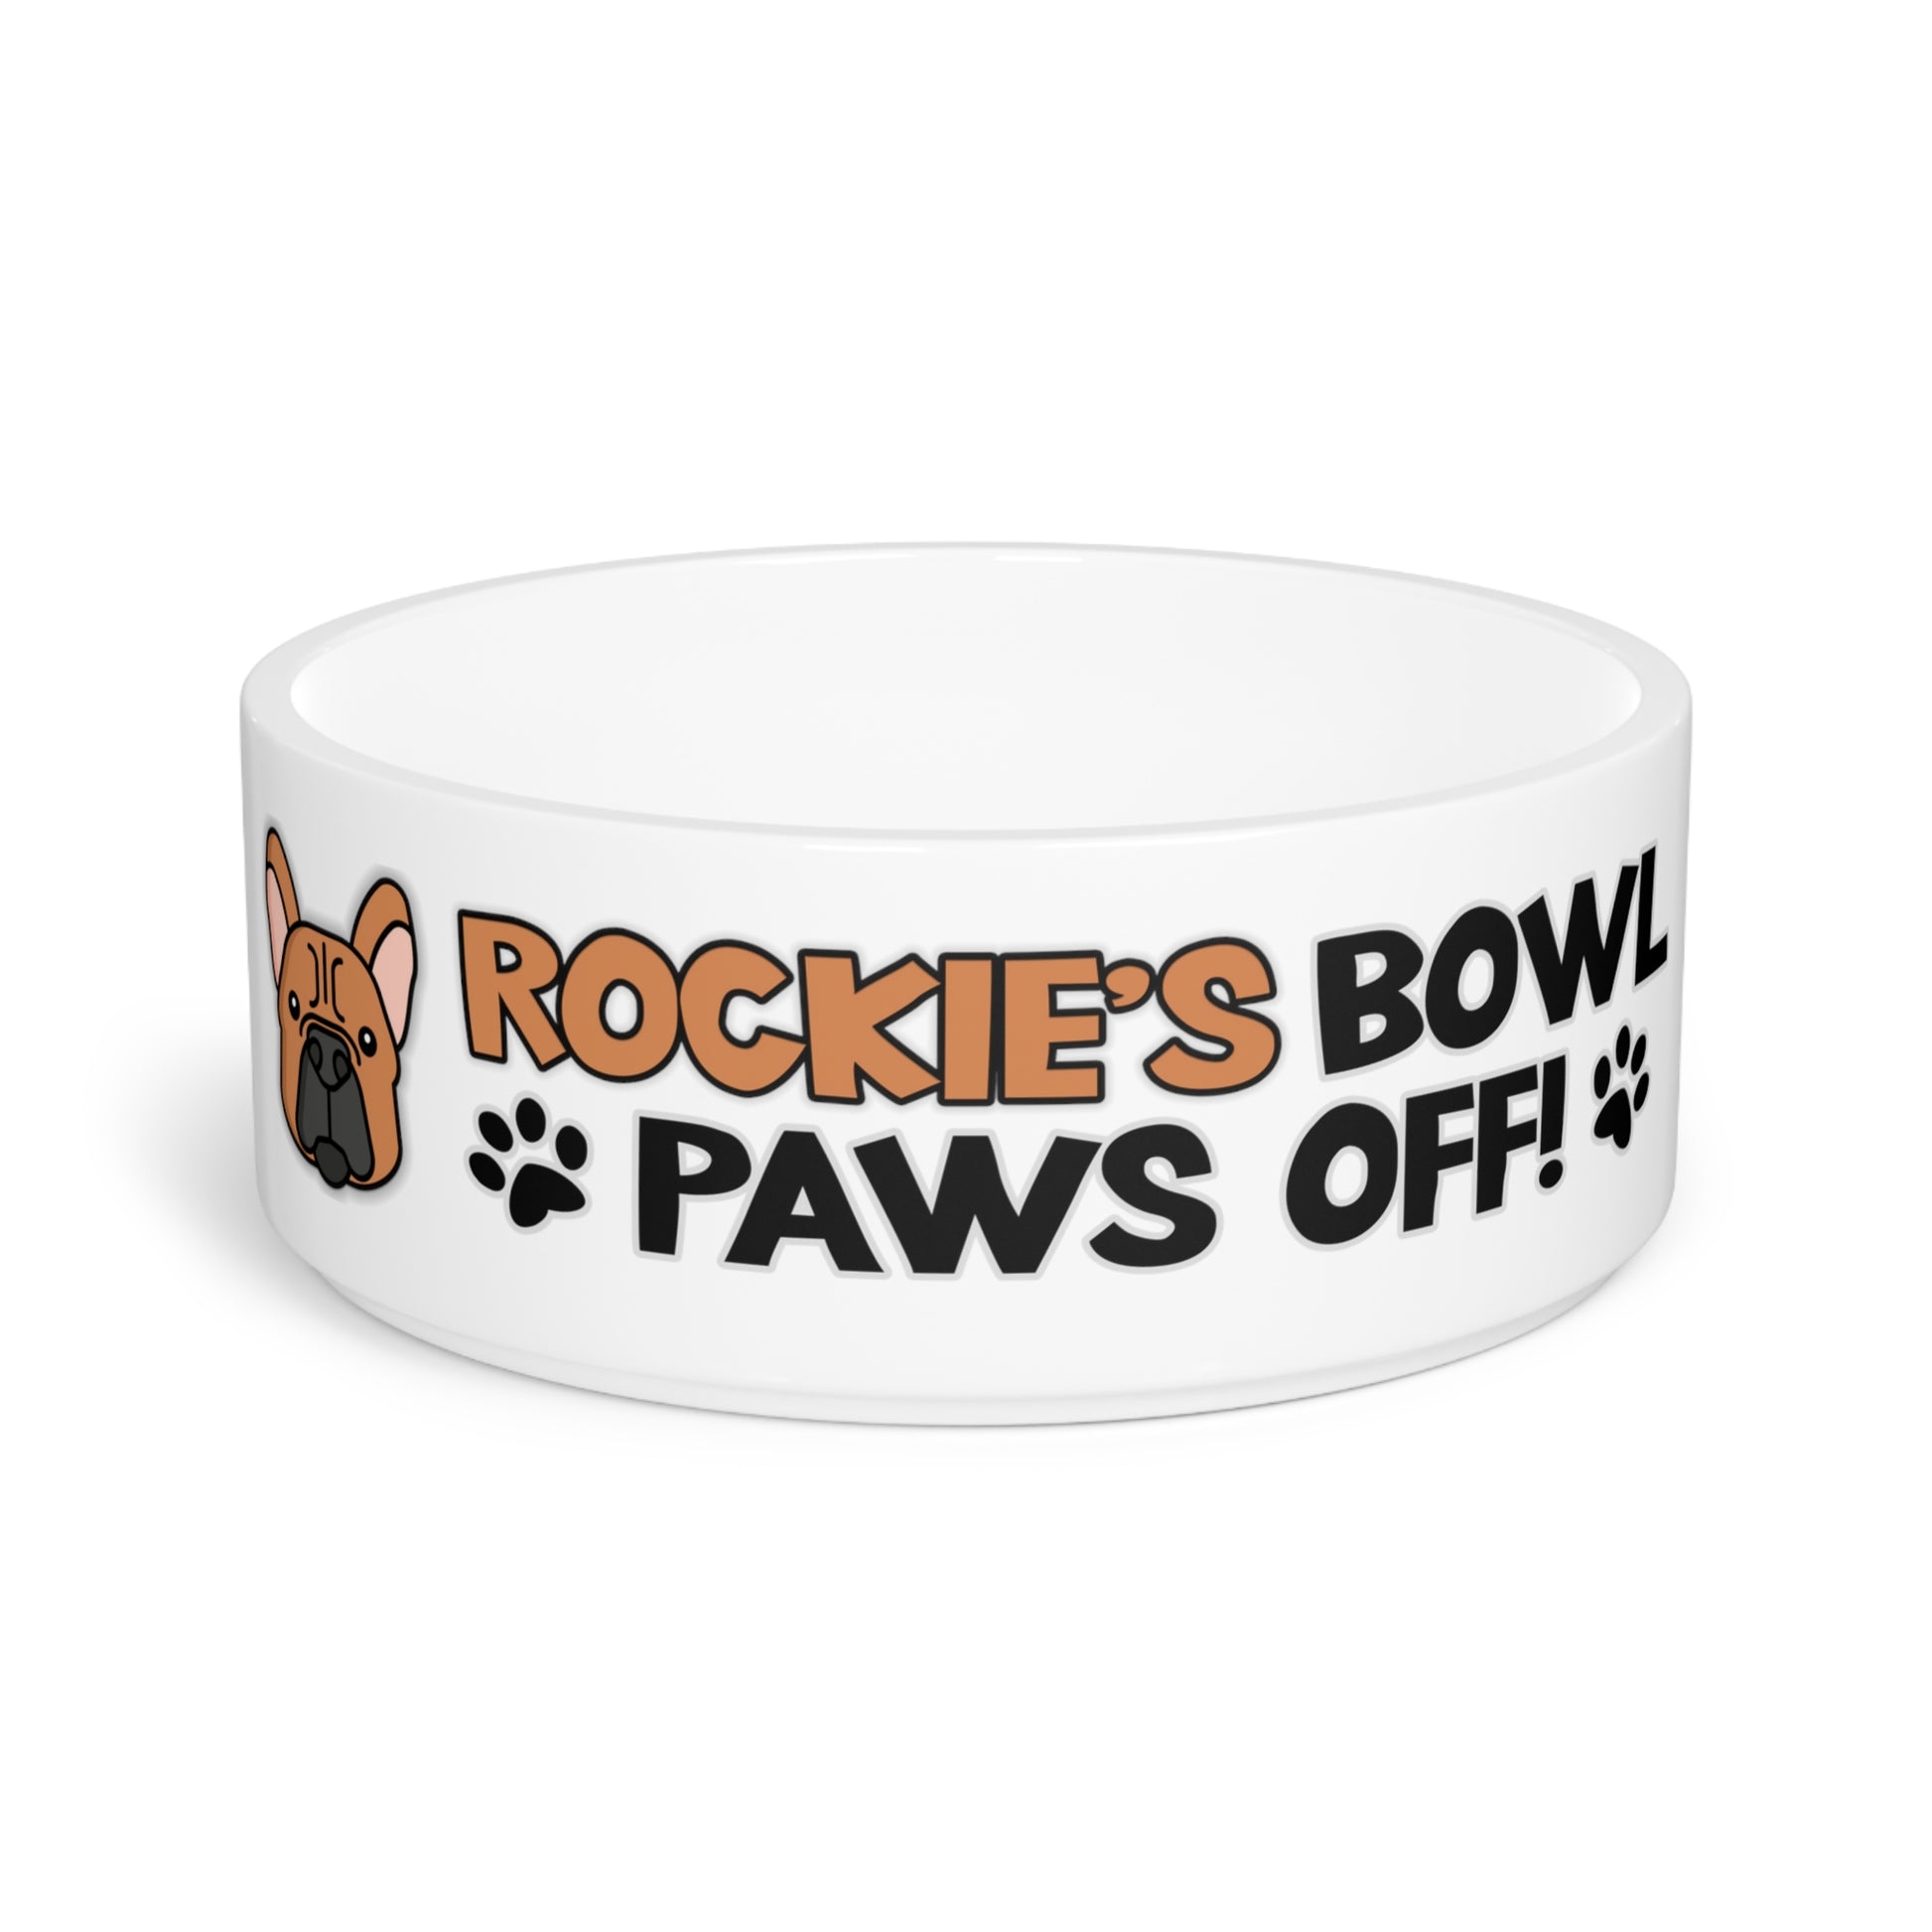 a personalized Dog Bowl with the phrase: "Rockie's Bowl Paws Off!"